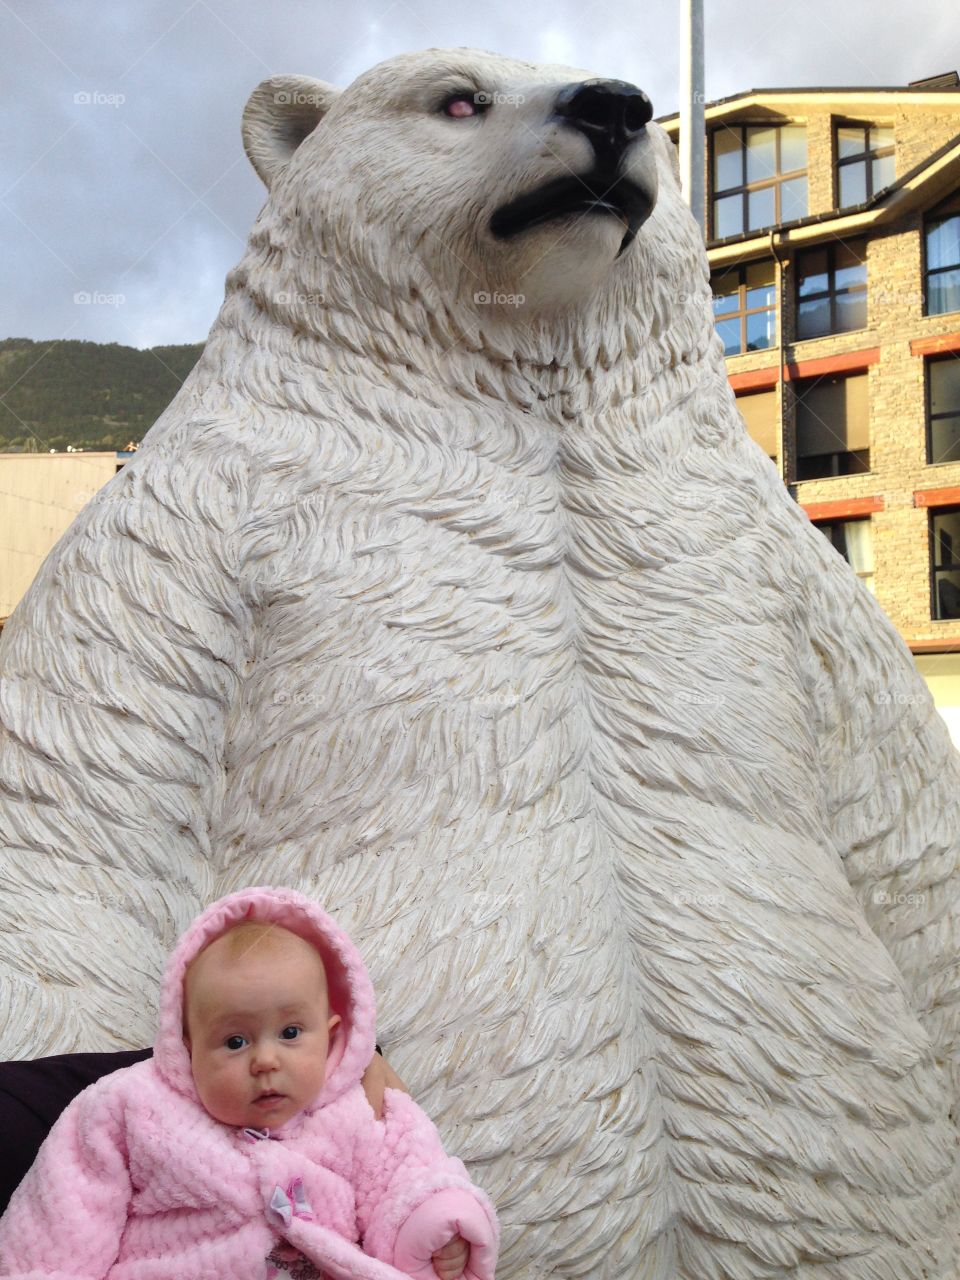 My Baby and the white Bear